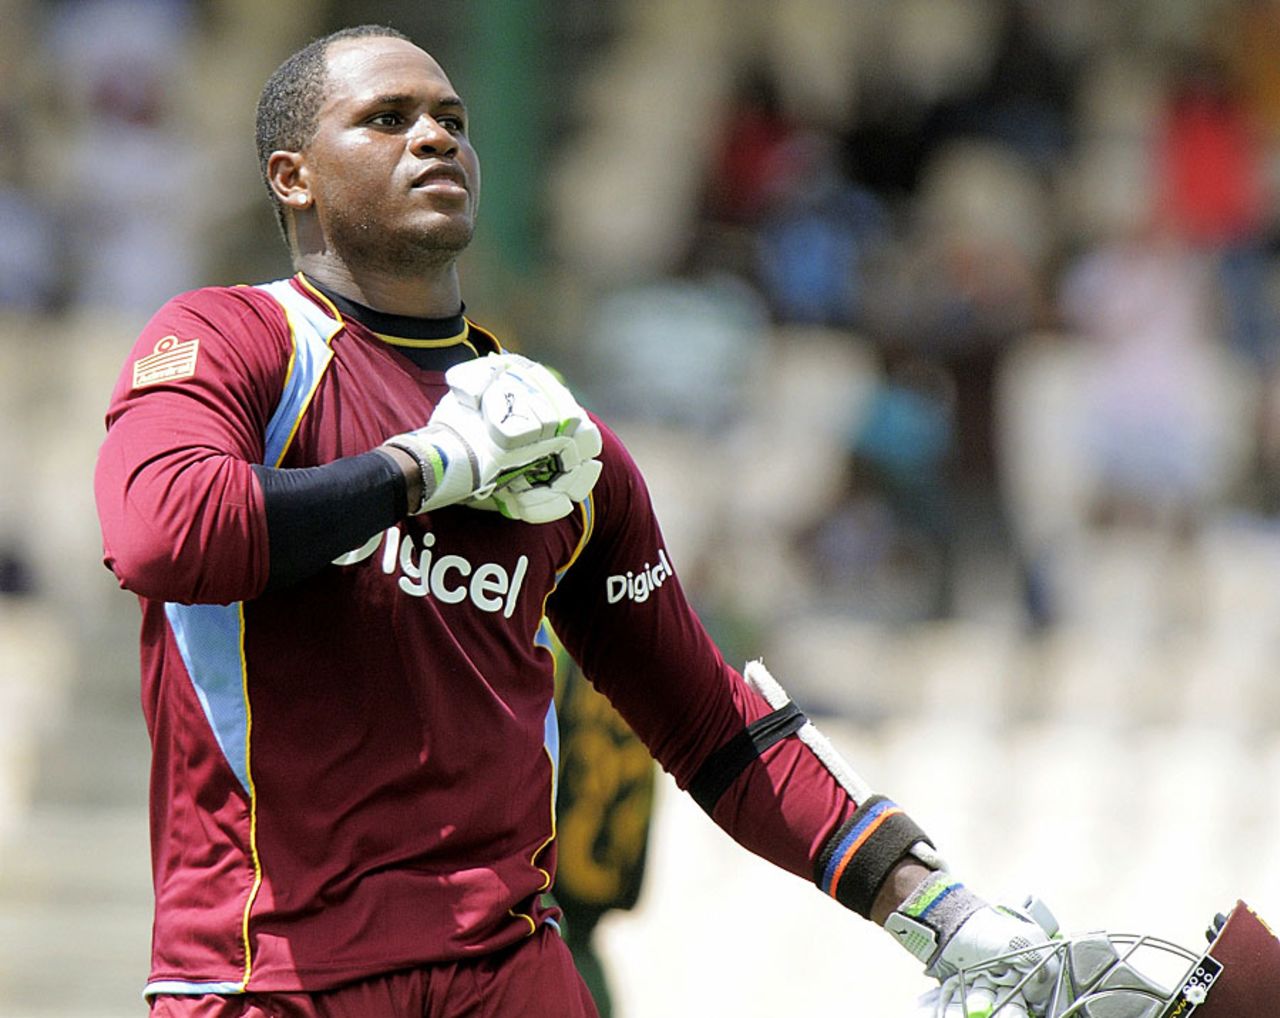 Marlon Samuels beats his chest on reaching his century, West Indies v Pakistan, 4th ODI, St Lucia, July 21, 2013